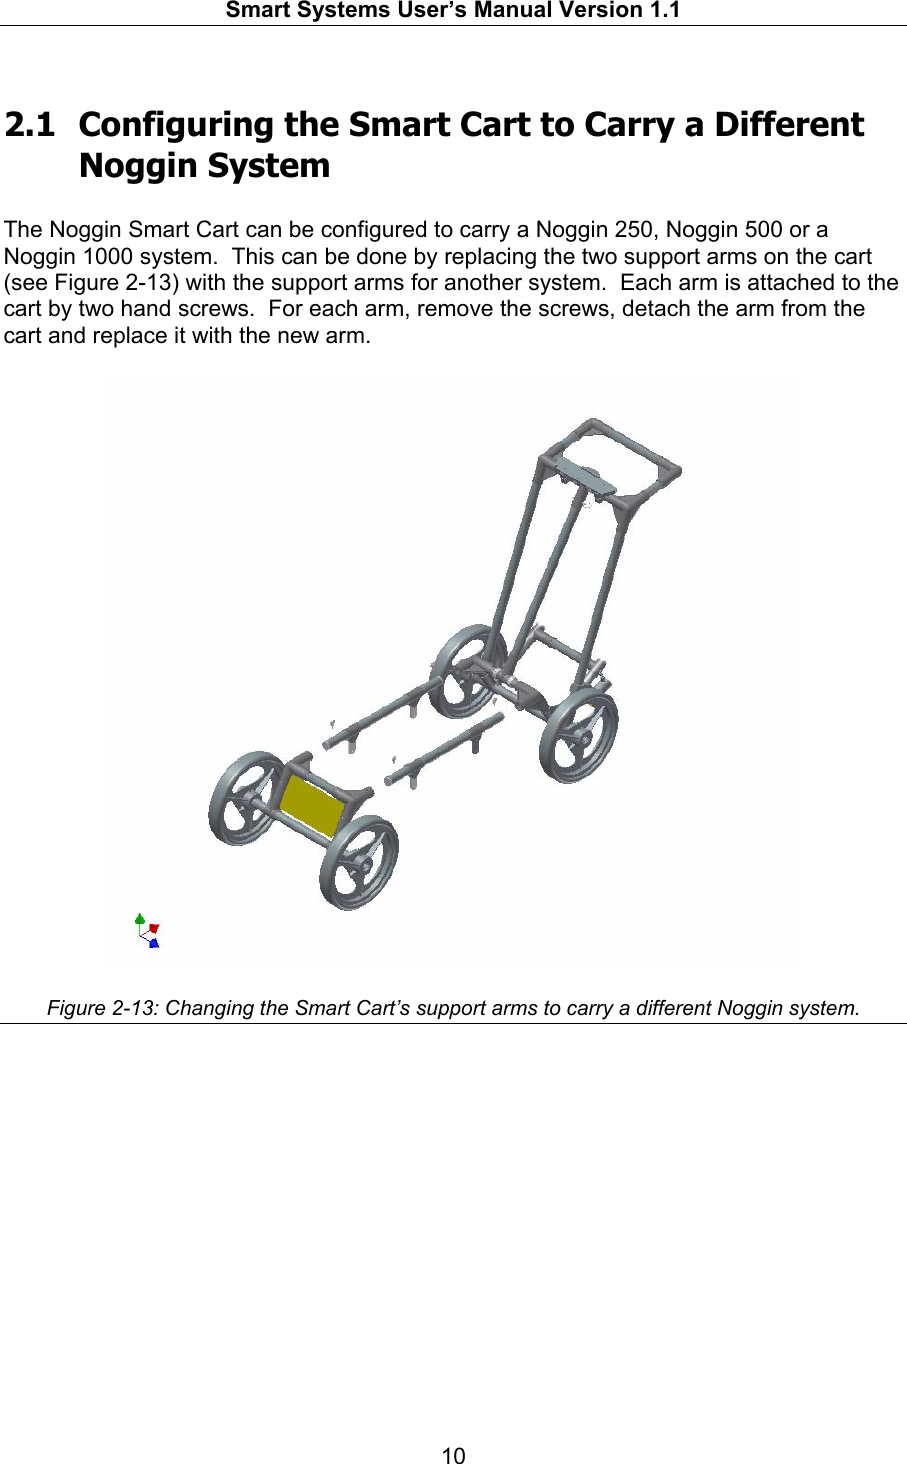   Smart Systems User’s Manual Version 1.1  10   2.1 Configuring the Smart Cart to Carry a Different Noggin System  The Noggin Smart Cart can be configured to carry a Noggin 250, Noggin 500 or a Noggin 1000 system.  This can be done by replacing the two support arms on the cart (see Figure 2-13) with the support arms for another system.  Each arm is attached to the cart by two hand screws.  For each arm, remove the screws, detach the arm from the cart and replace it with the new arm.    Figure 2-13: Changing the Smart Cart’s support arms to carry a different Noggin system. 